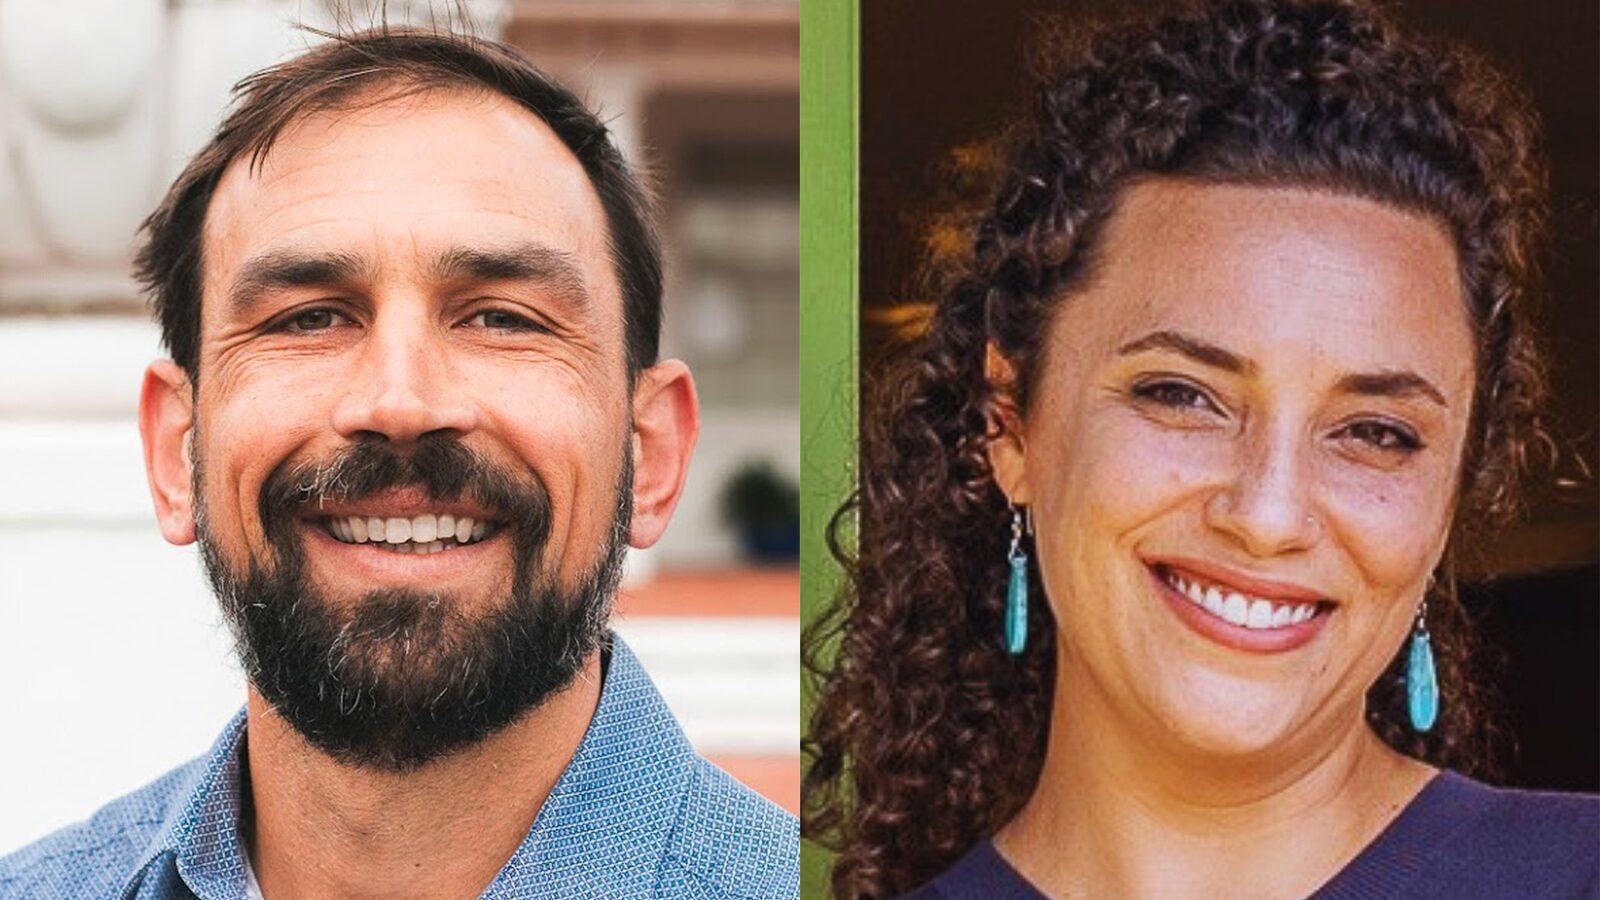 Side-by-side photos of David Tannaci and Gabriela Trigueiro, candidates for the District 1 Santa Cruz City Council seat.